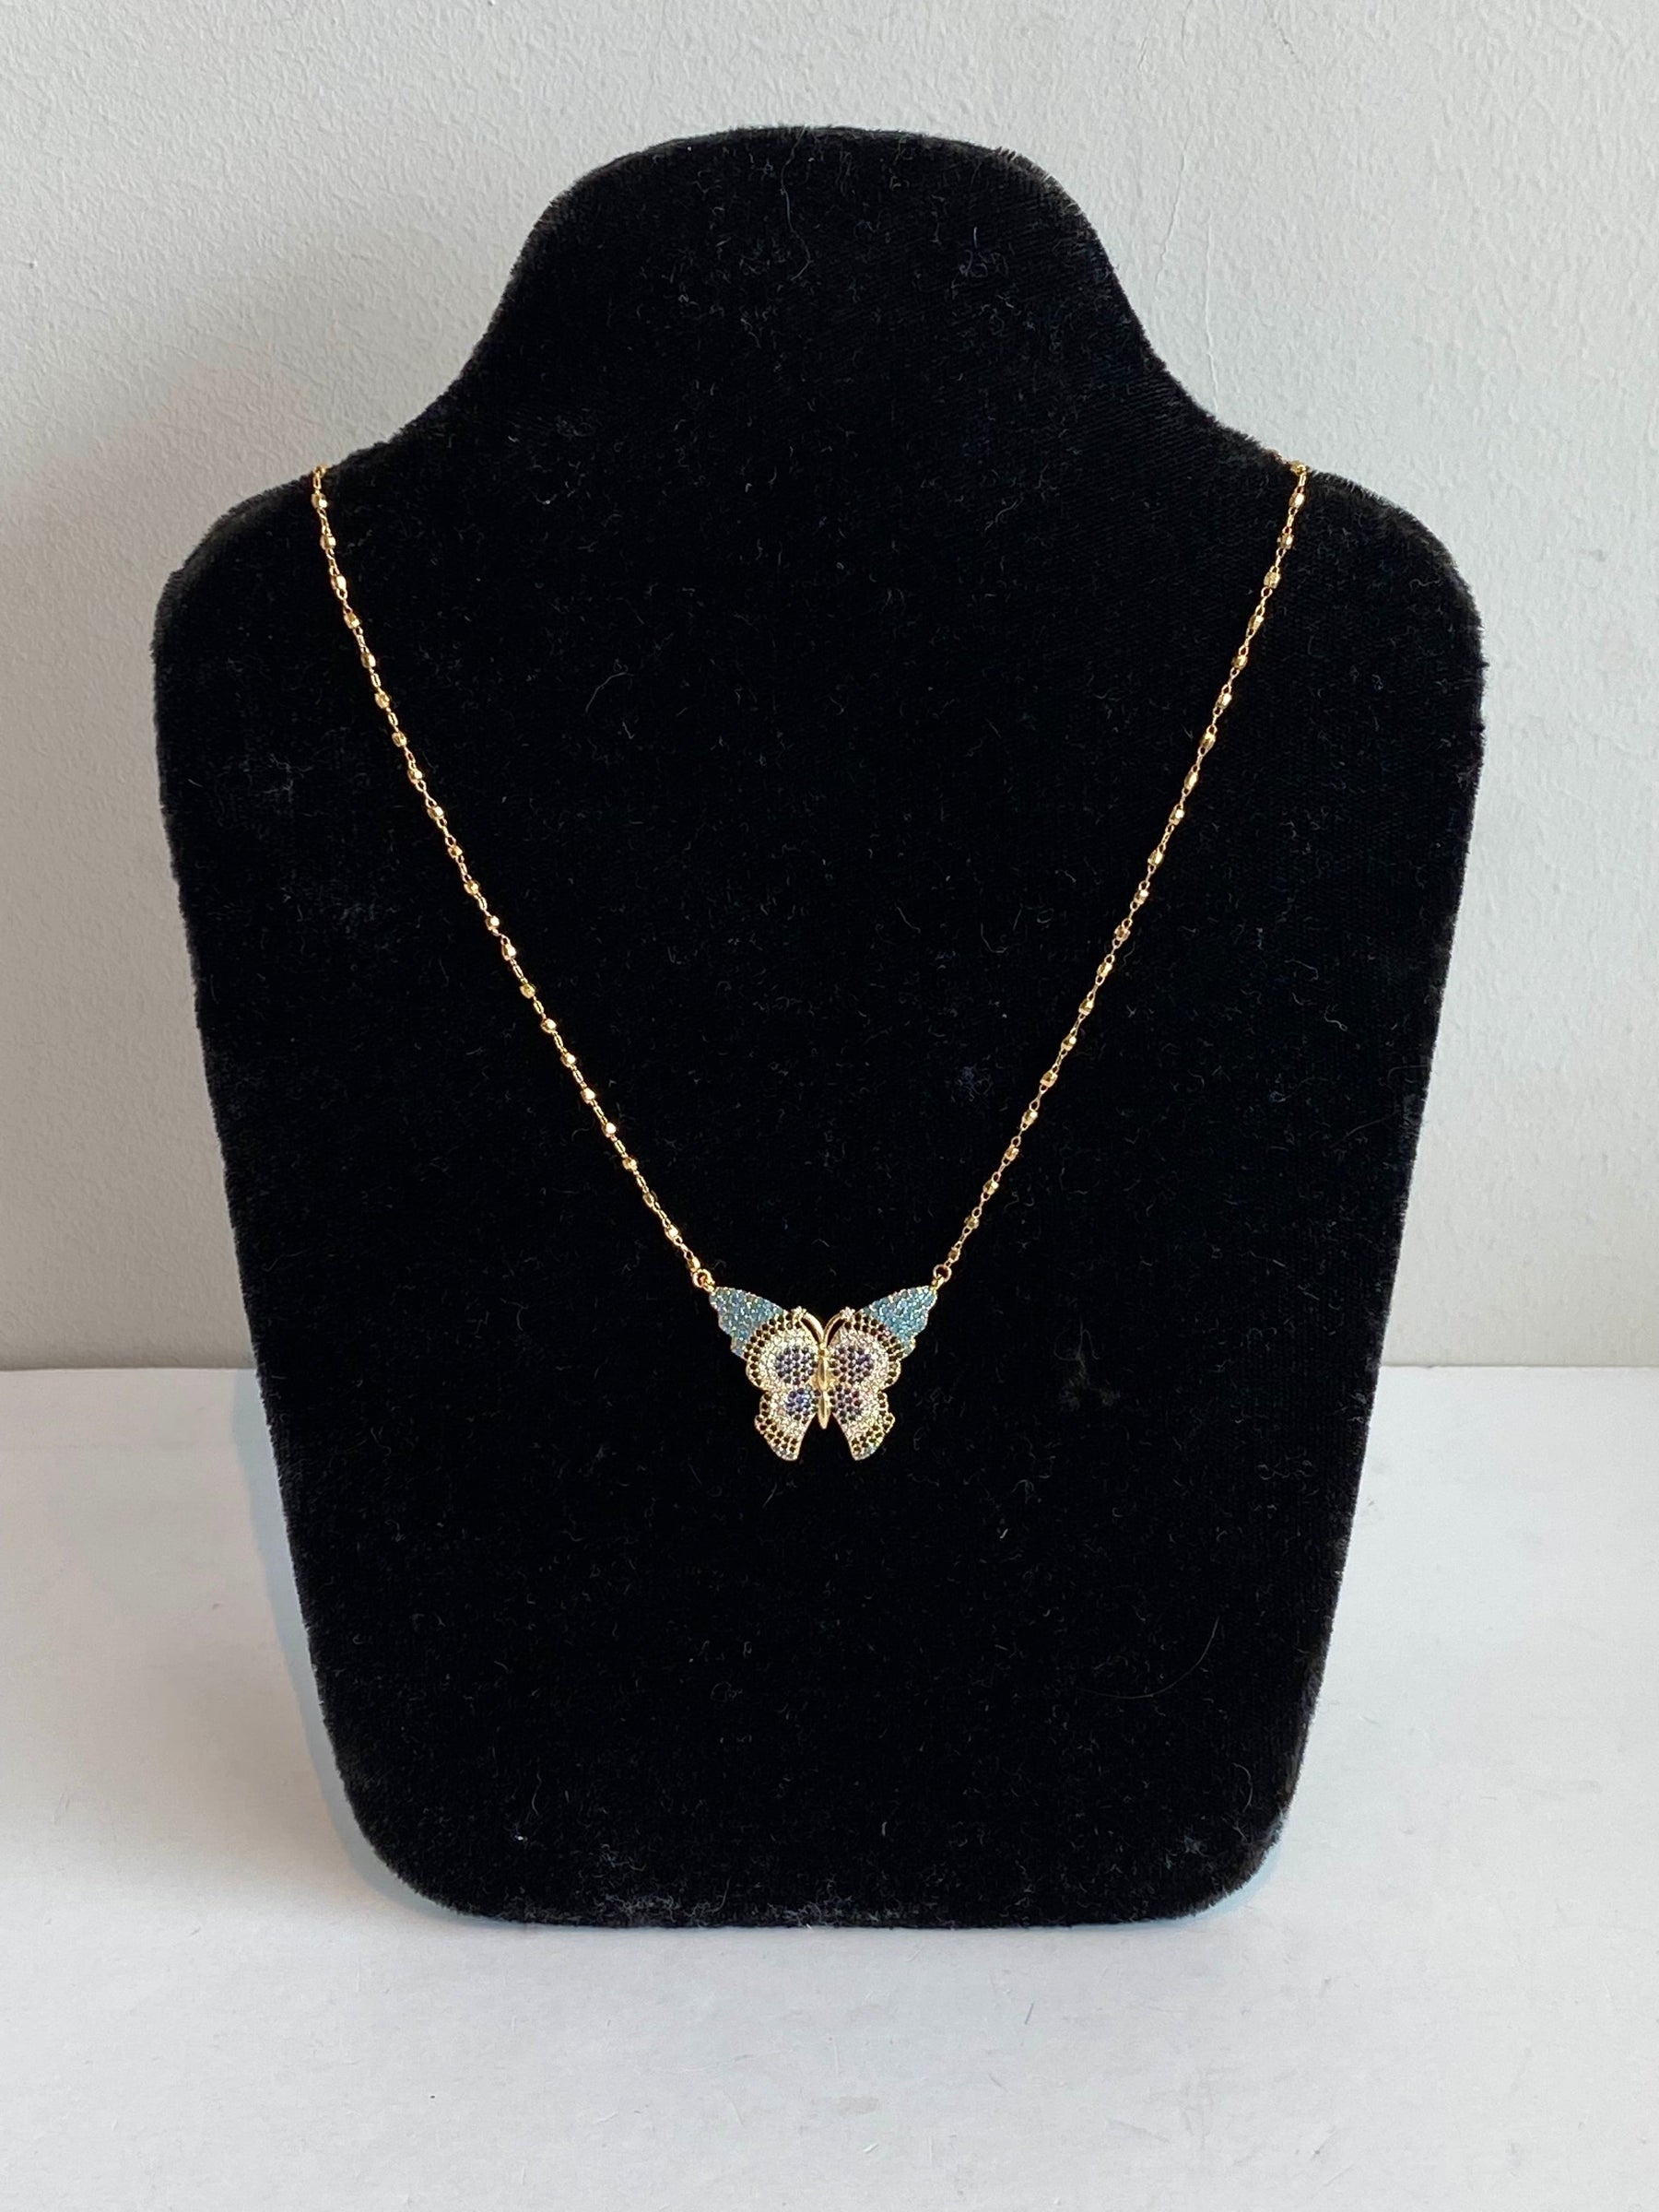 Jeweled Butterfly Necklace